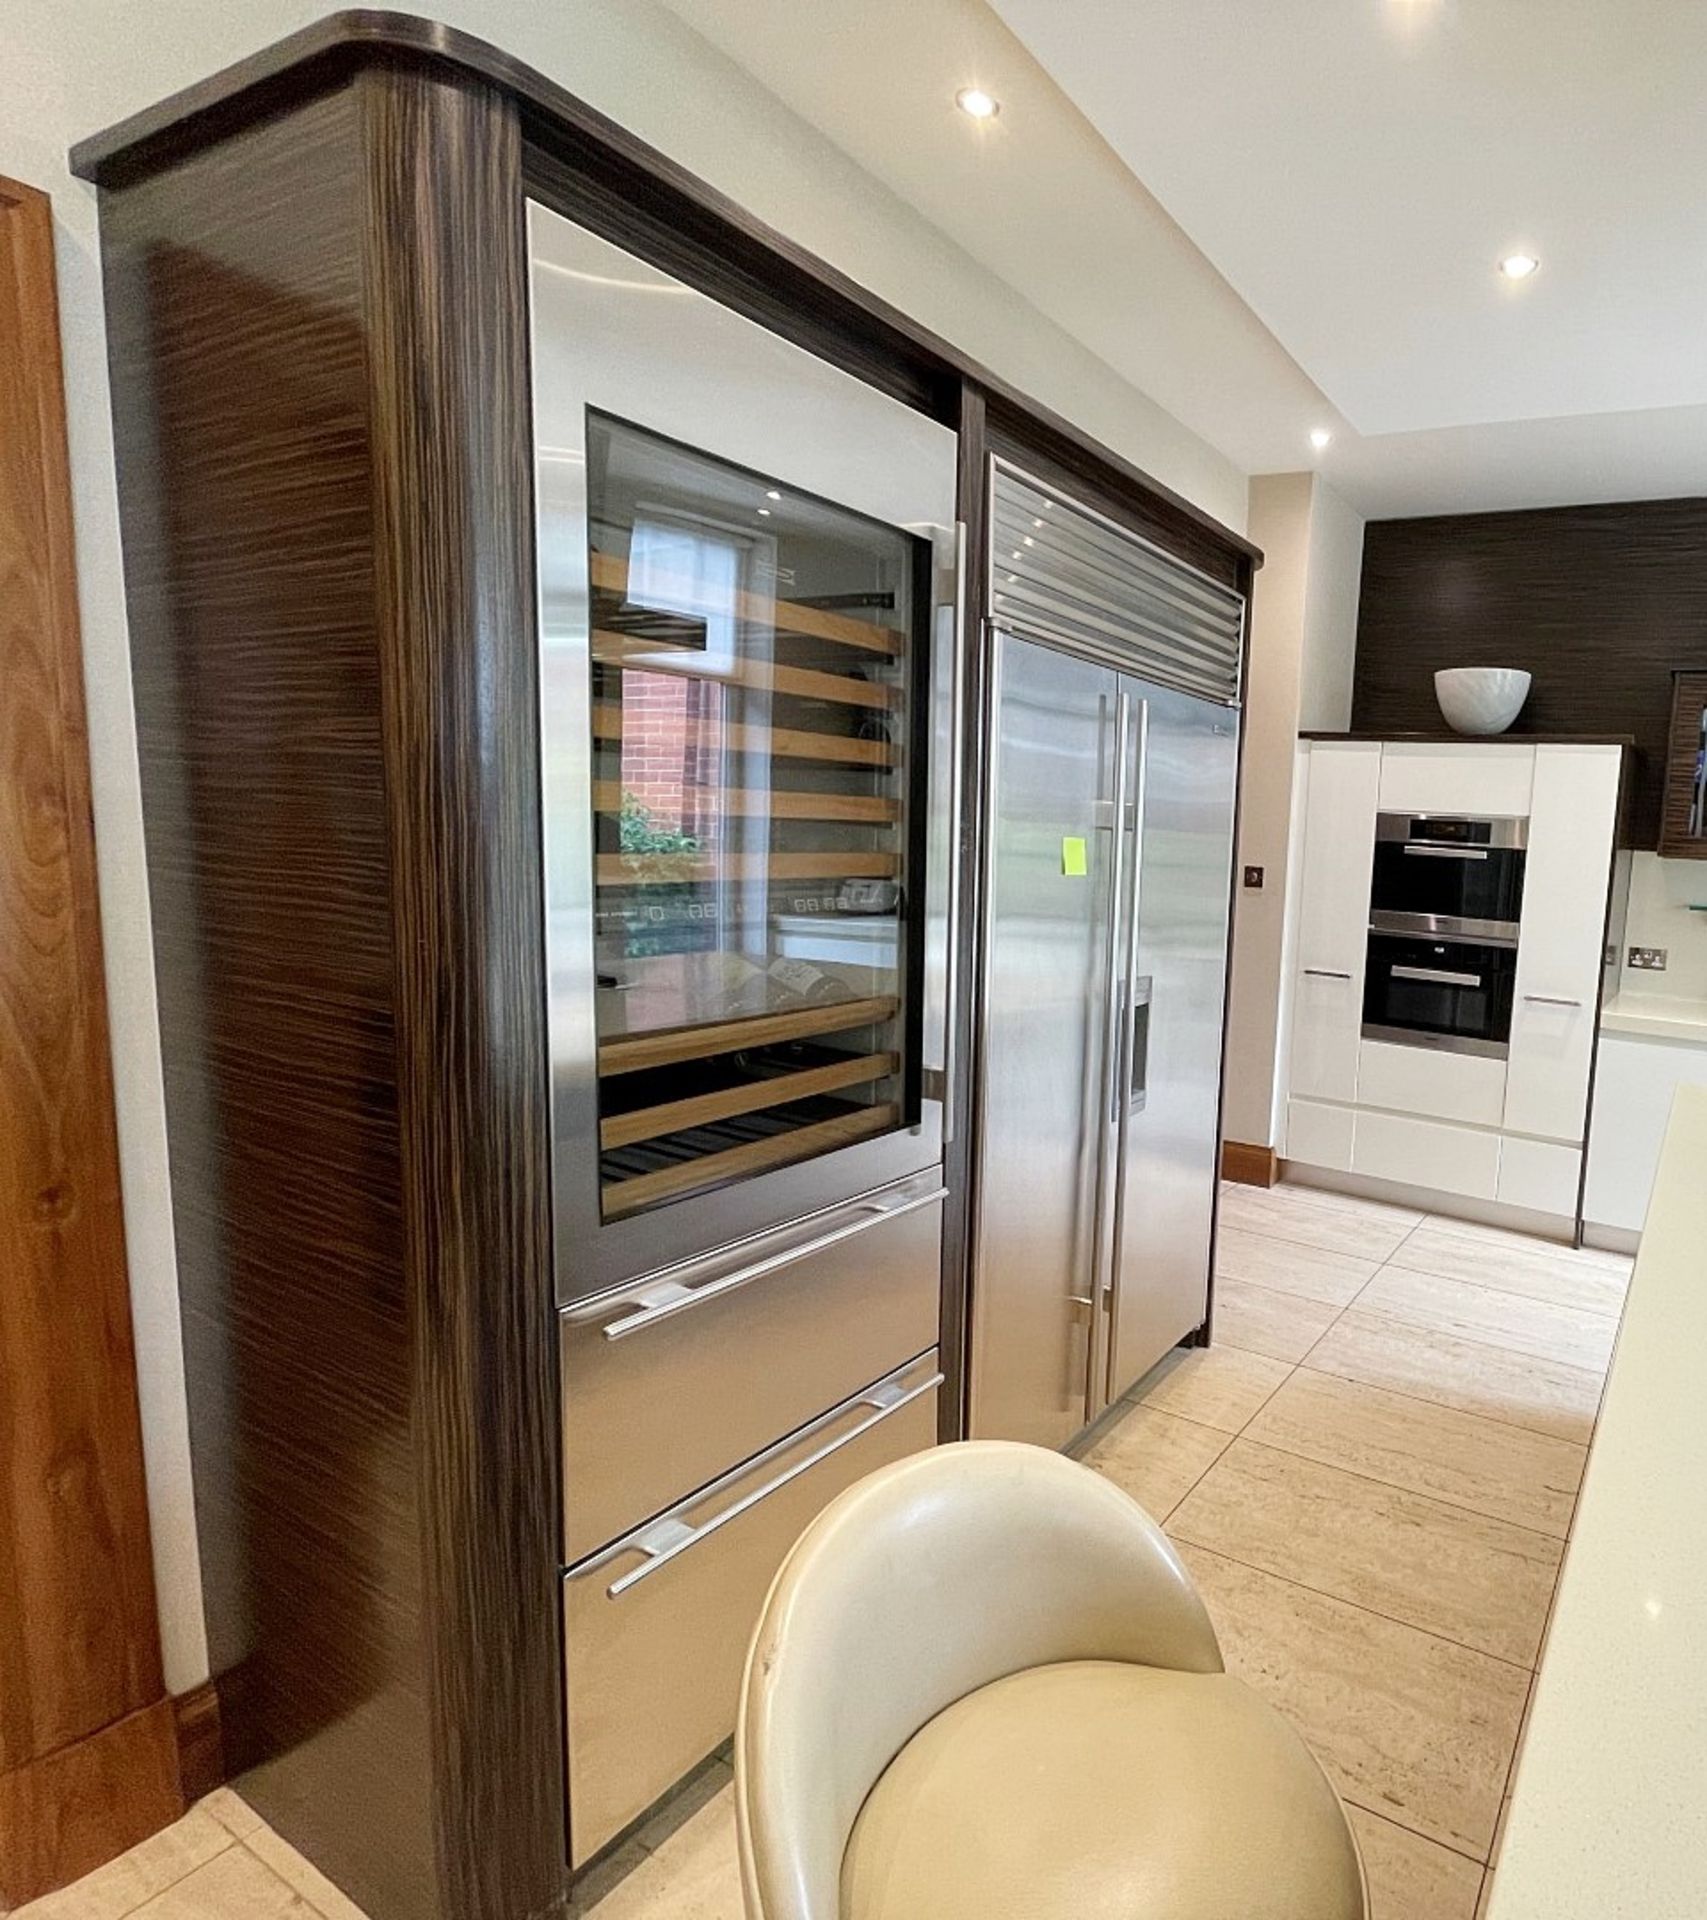 1 x Bespoke Fitted Mowlem & Co Kitchen With Miele, Wolf, and Sub Zero Appliances & Granite Worktops - Image 8 of 131